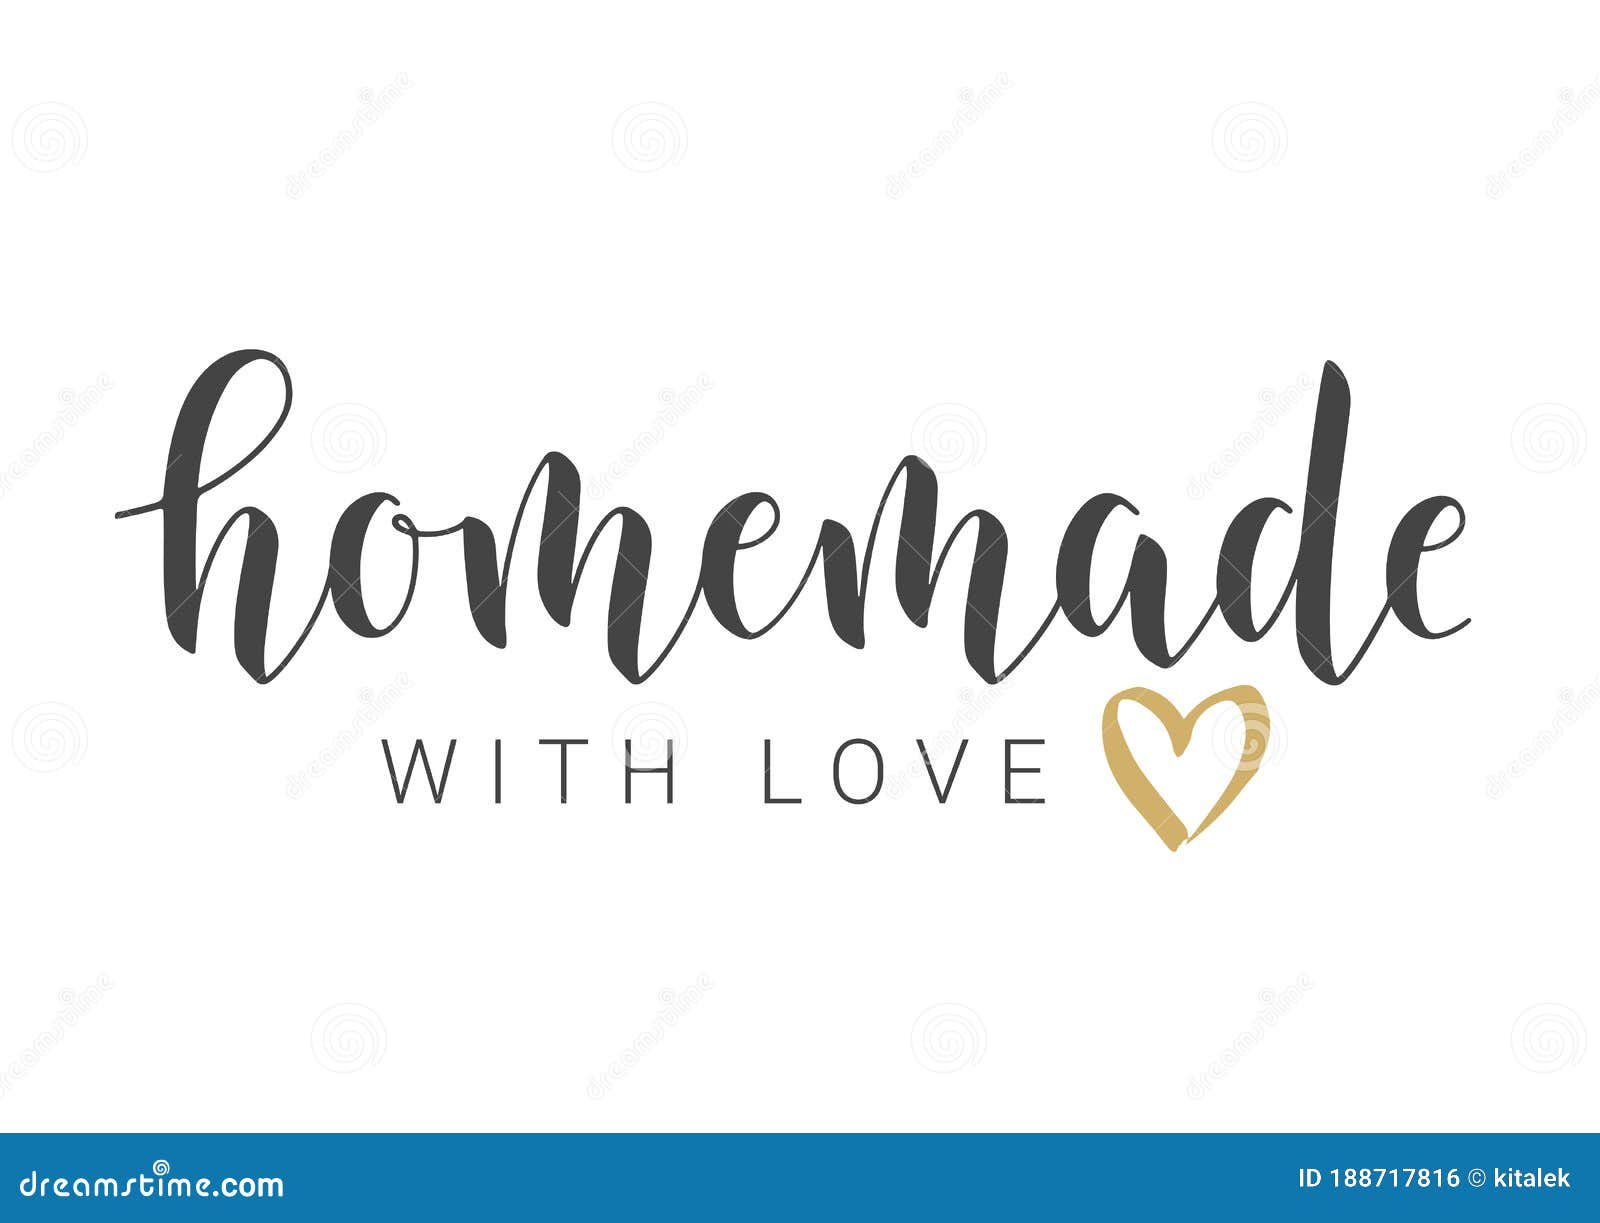 handwritten lettering of homemade with love.  